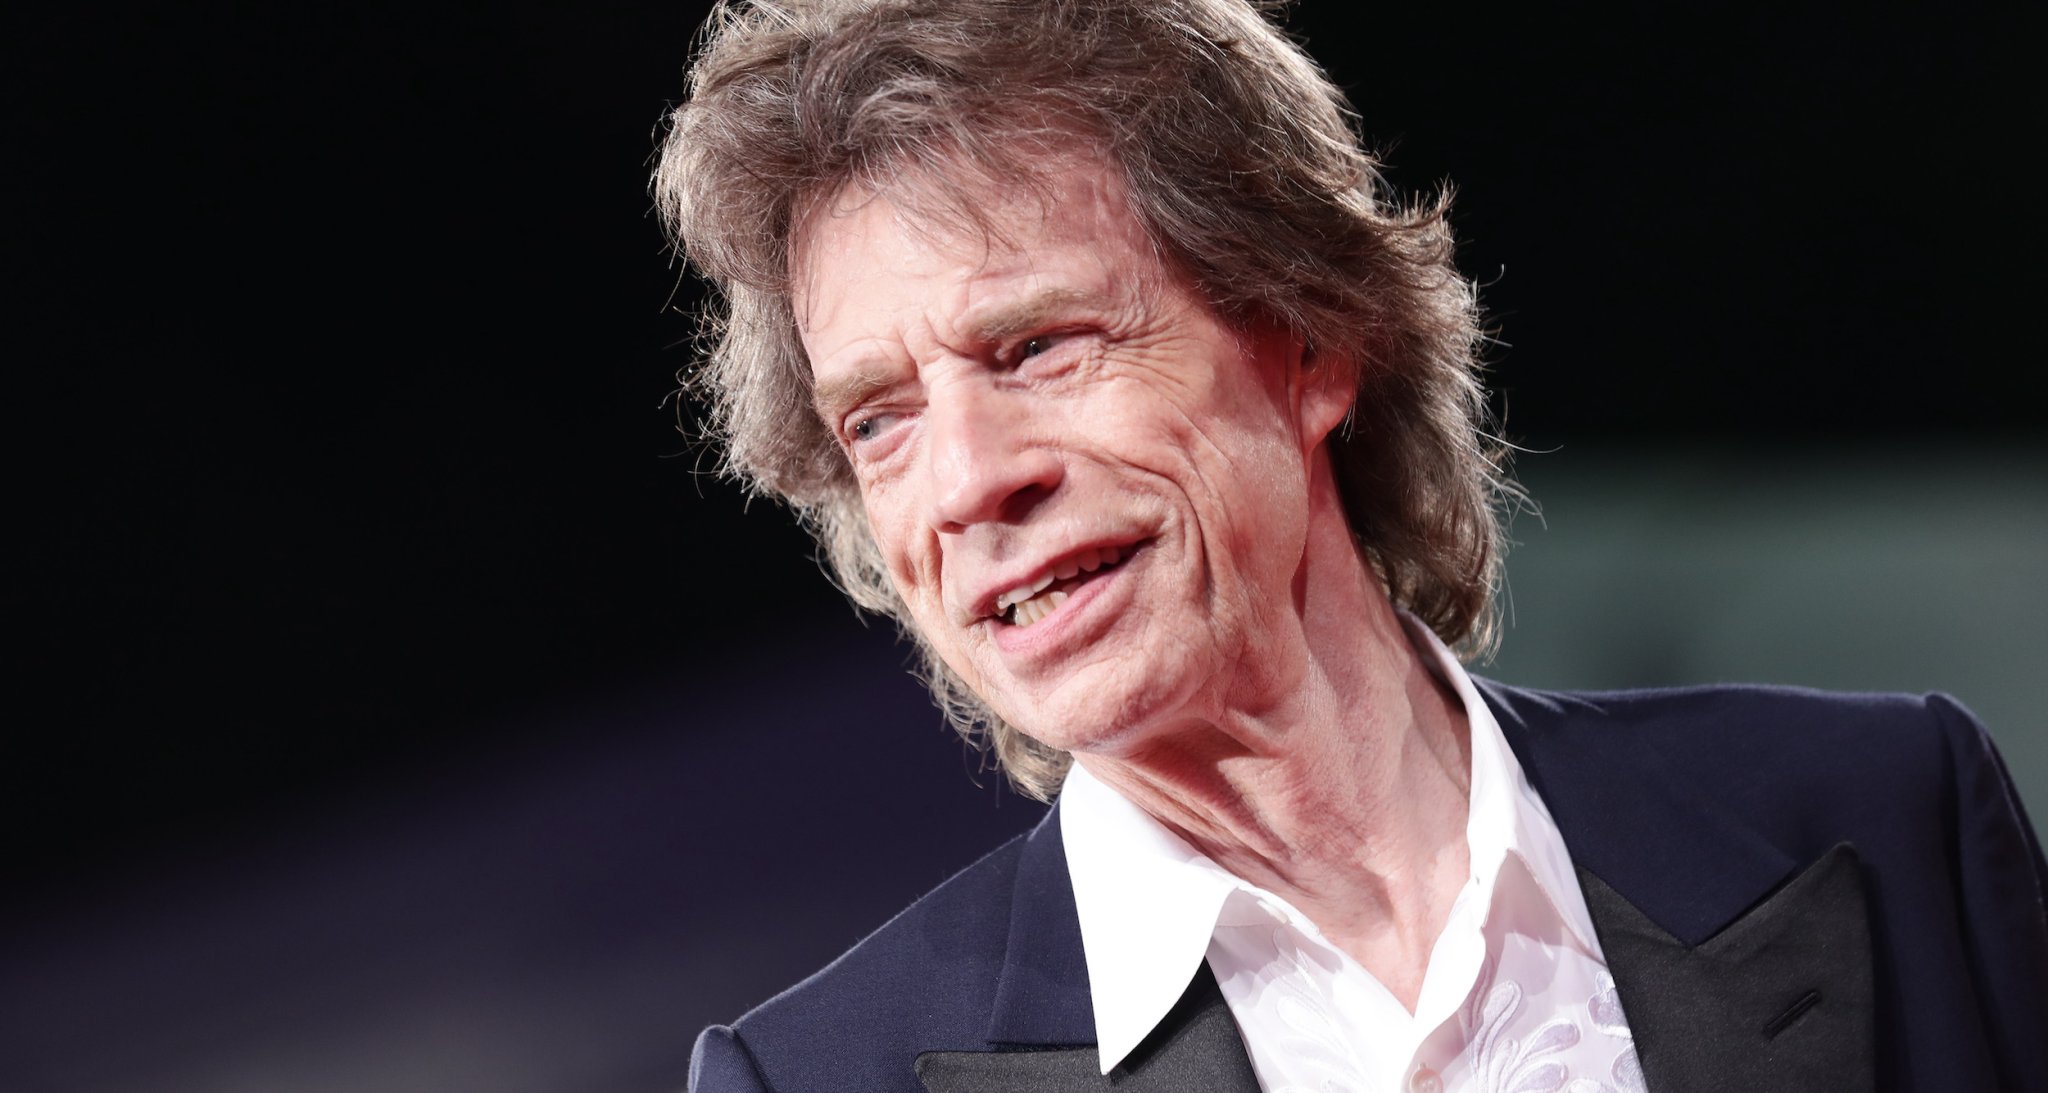 Mick Jagger takes a swipe at Harry Styles comparisons - cover